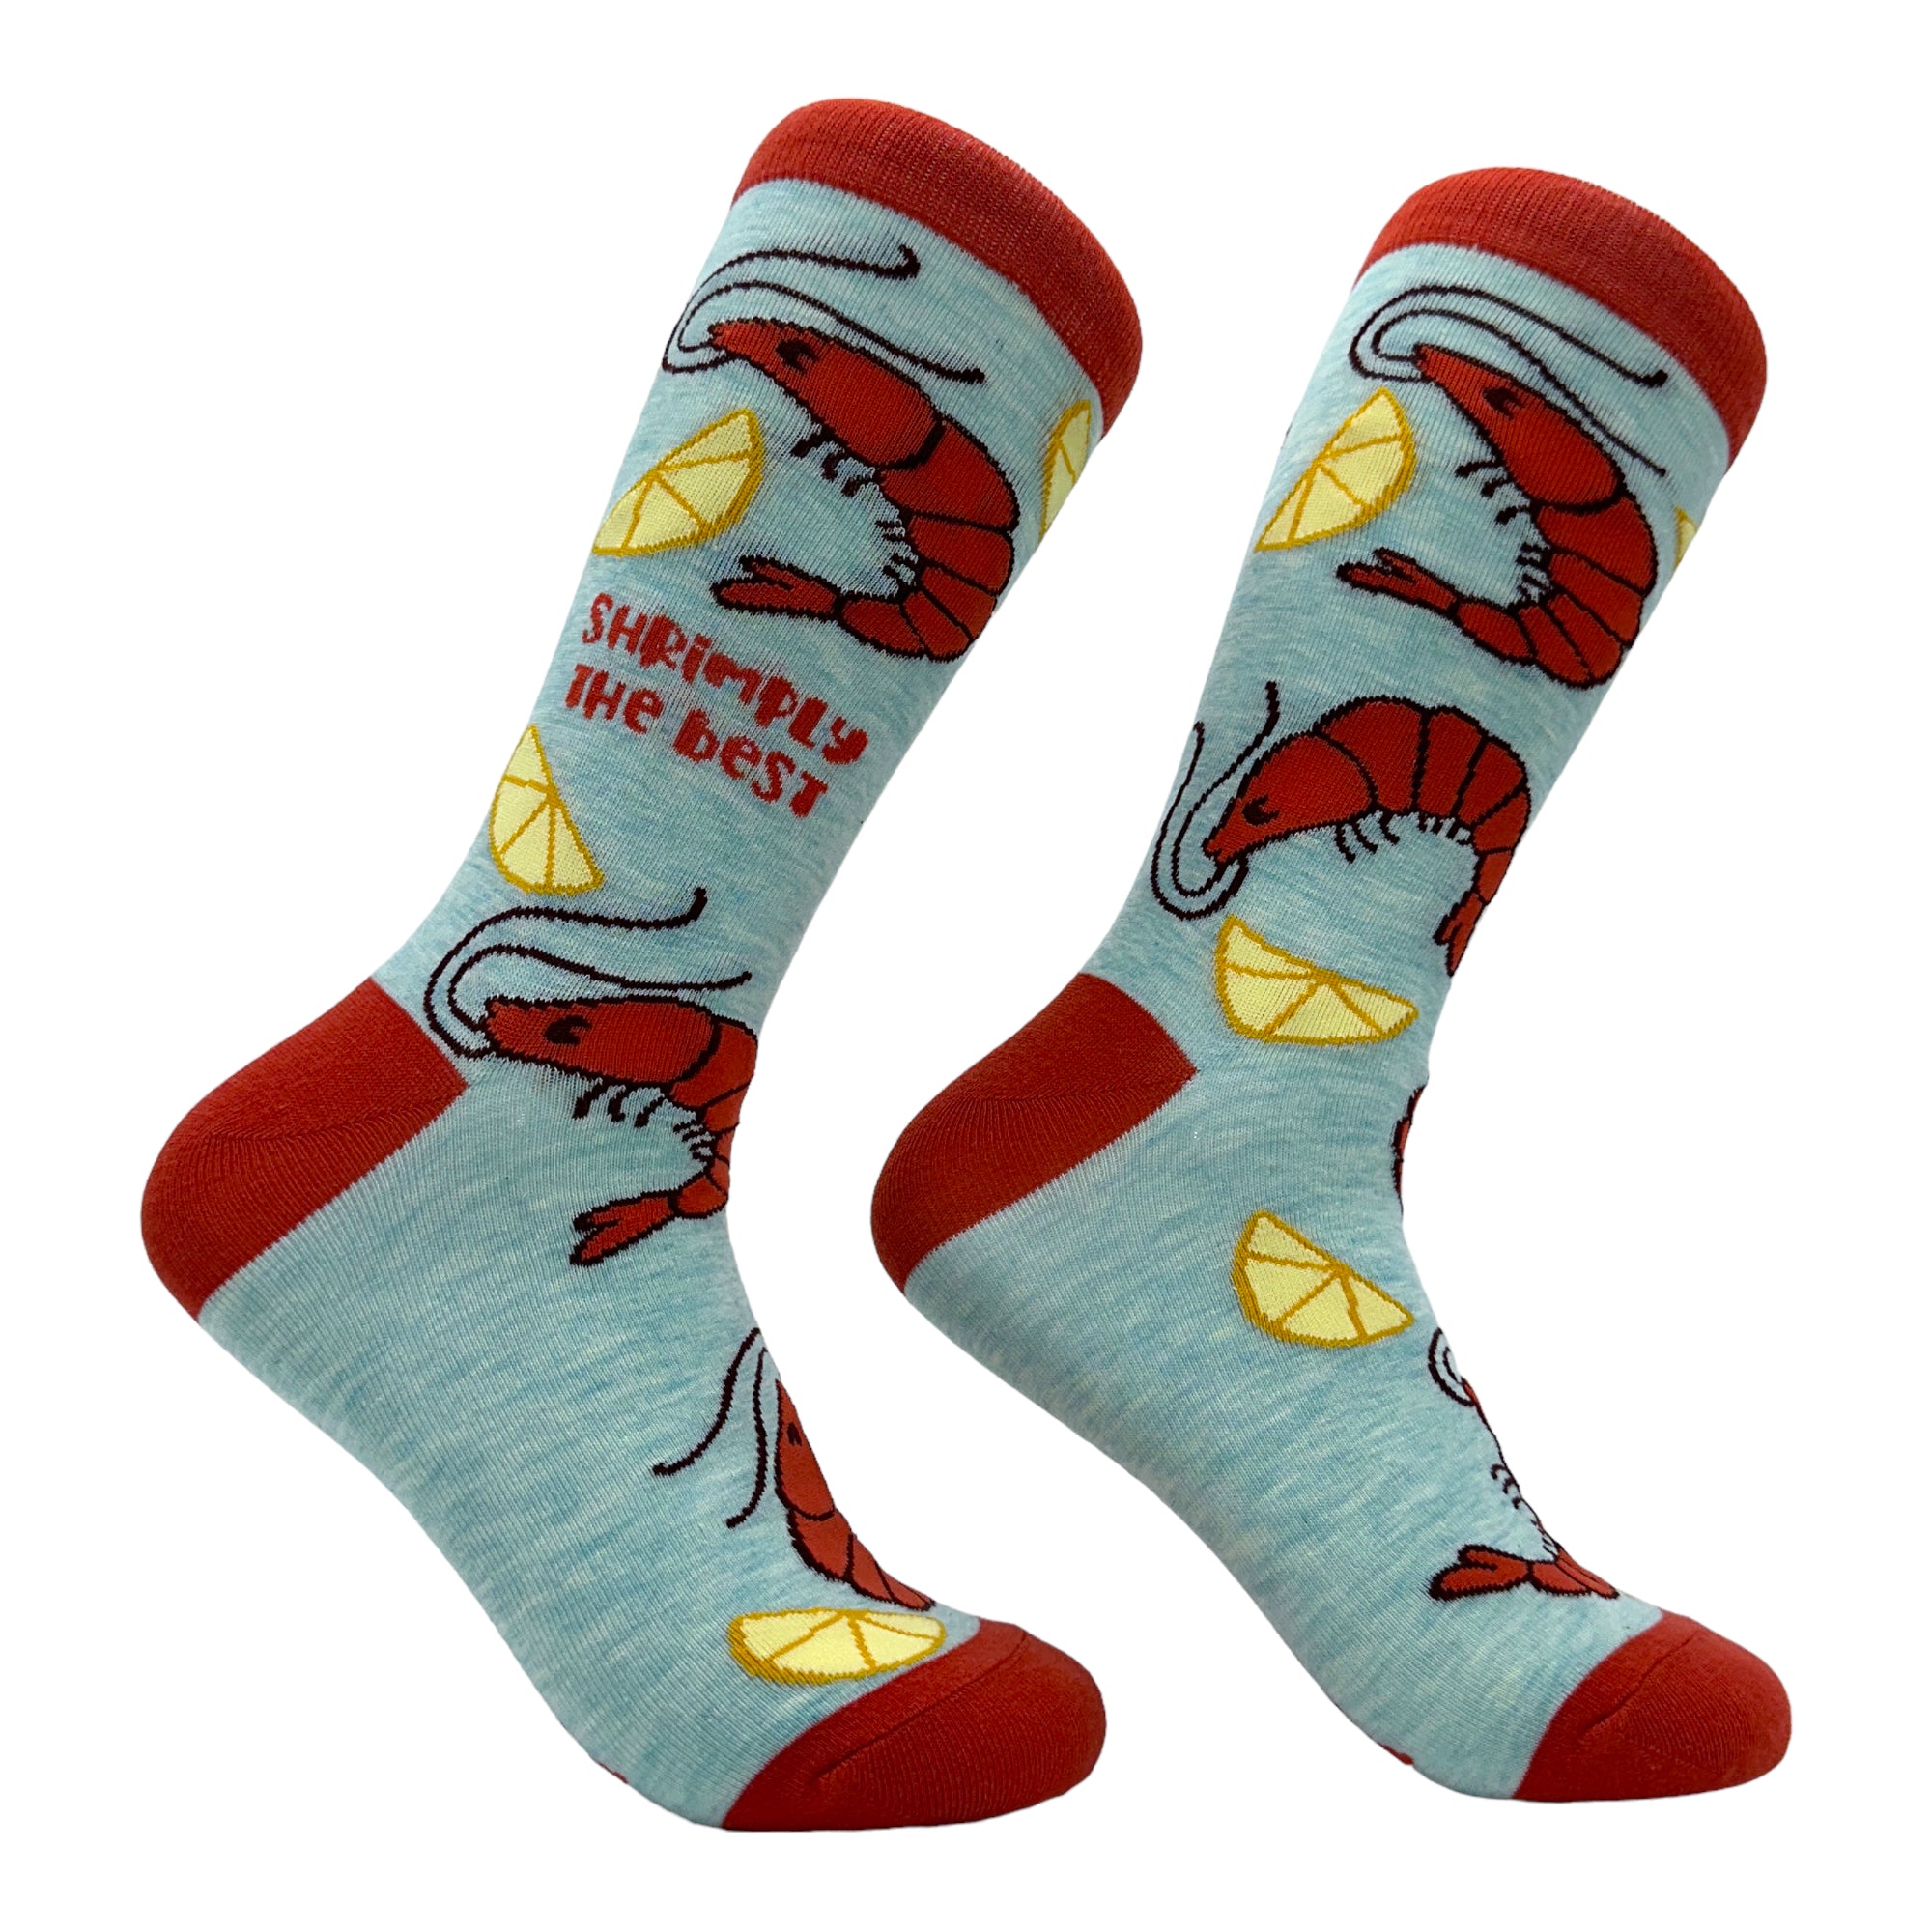 Funny Multi - Shrimply The Best Women's Shrimply The Best Sock Nerdy Food sarcastic Tee